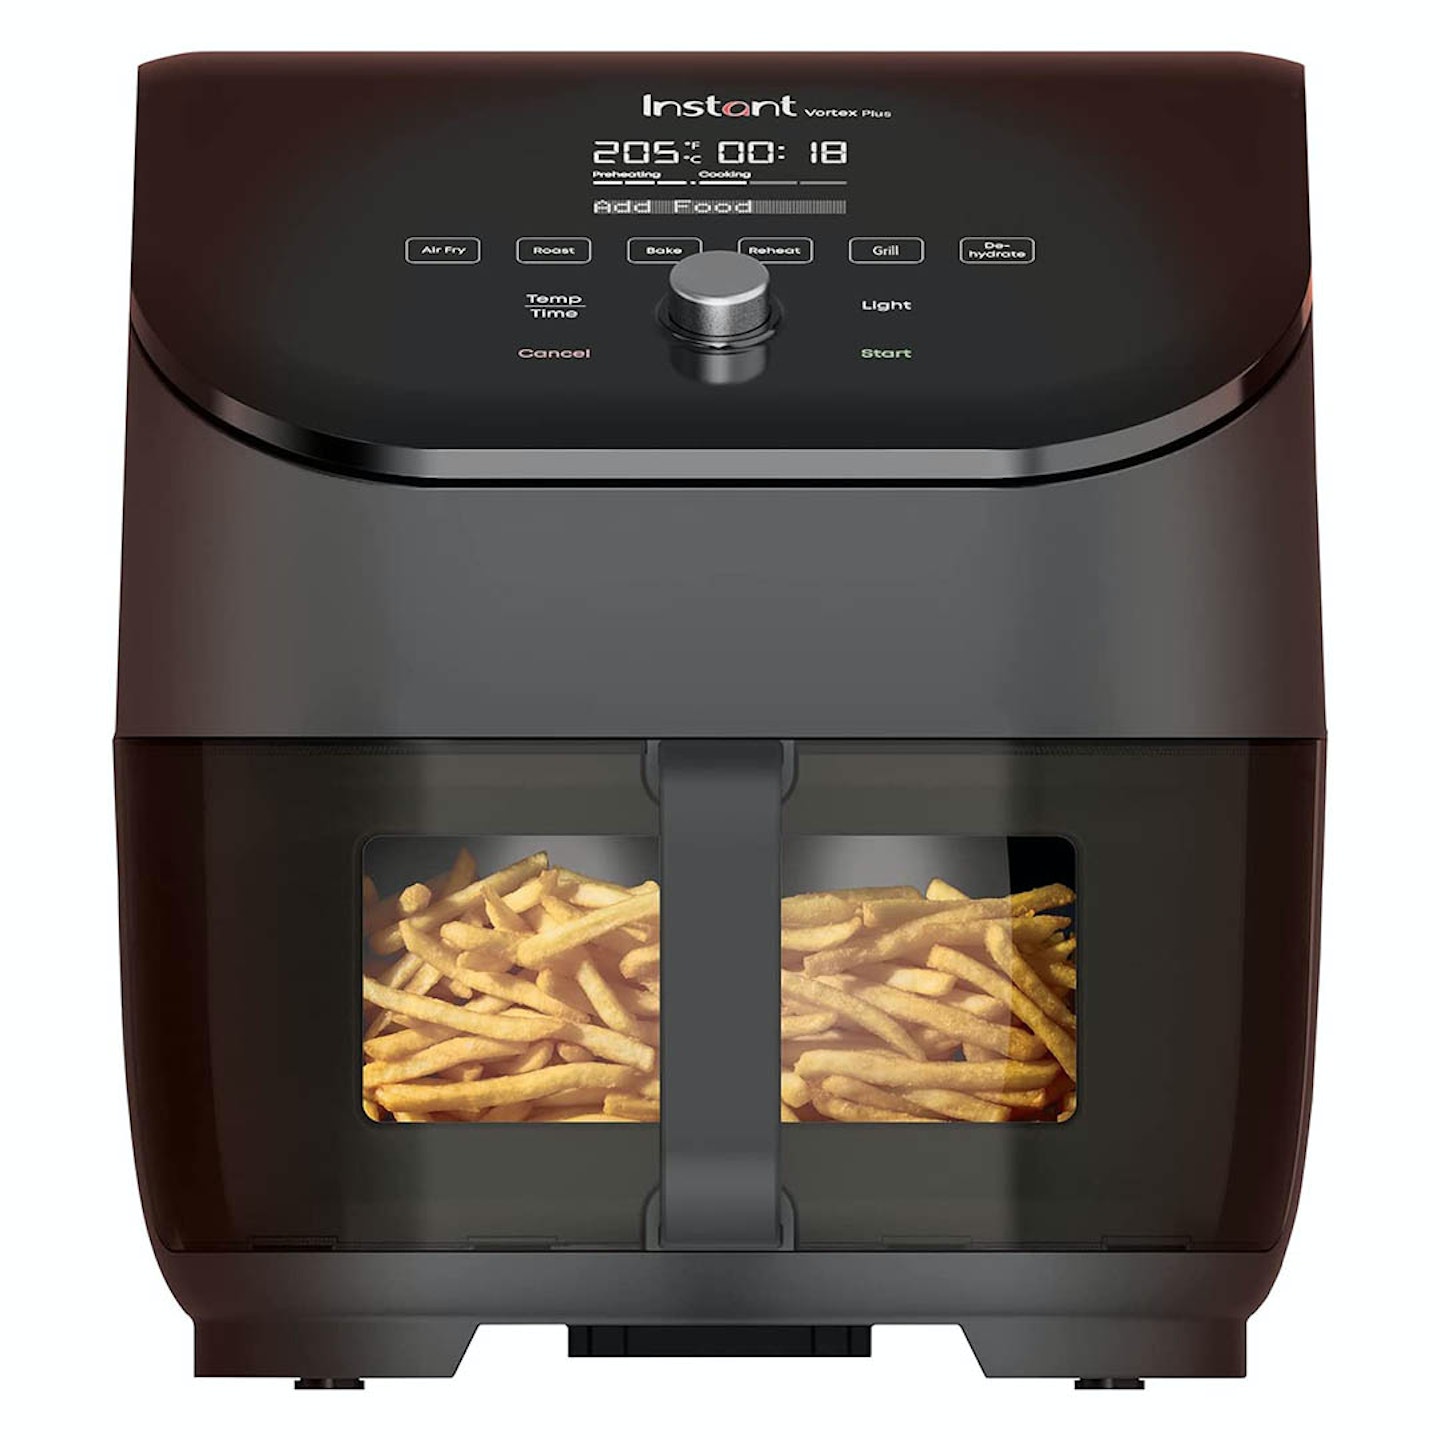 Instant Vortex Plus with ClearCook